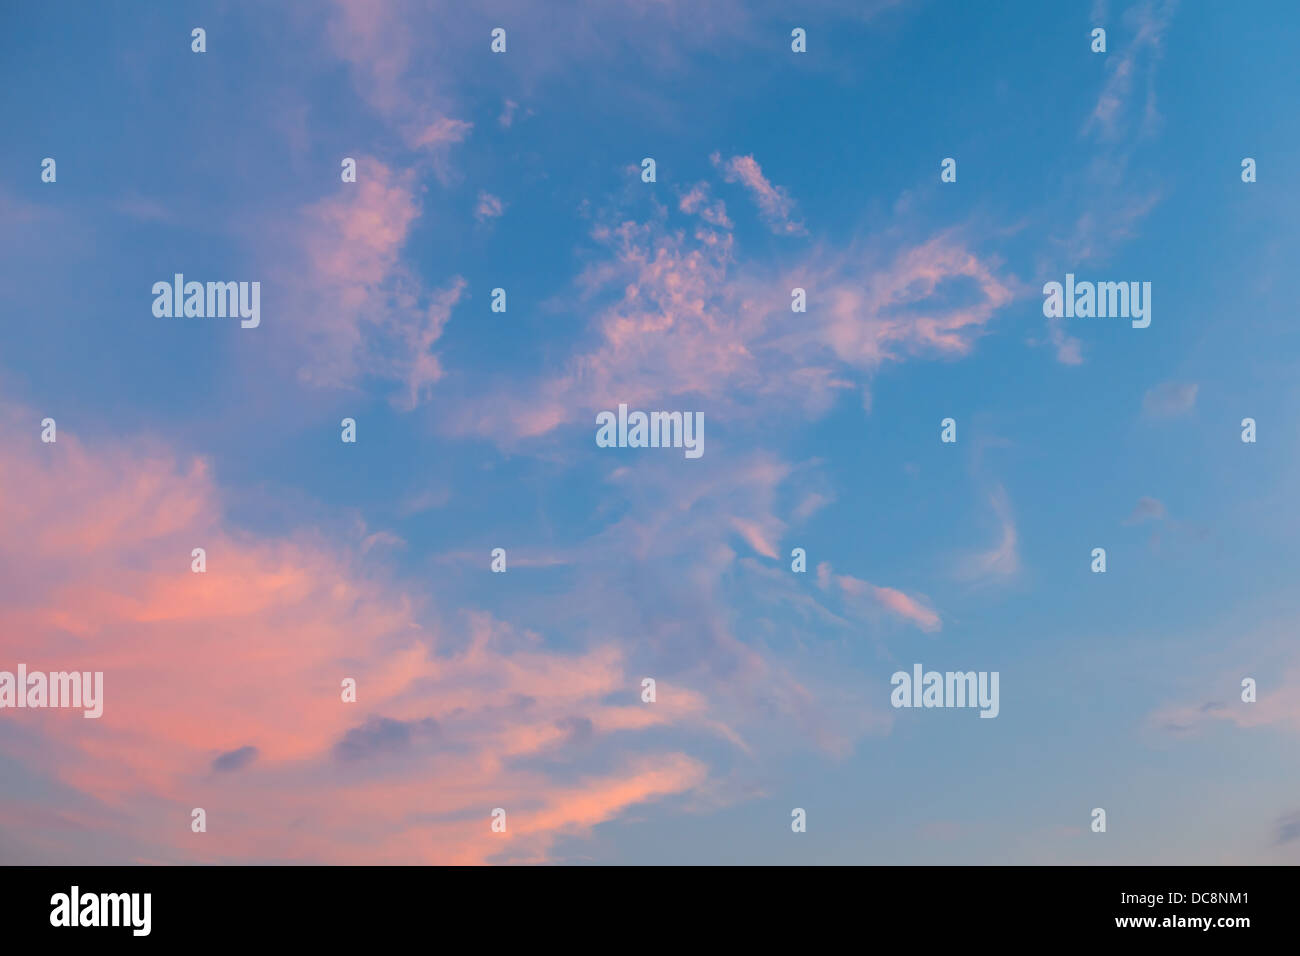 Morning cloudy sky background texture Stock Photo